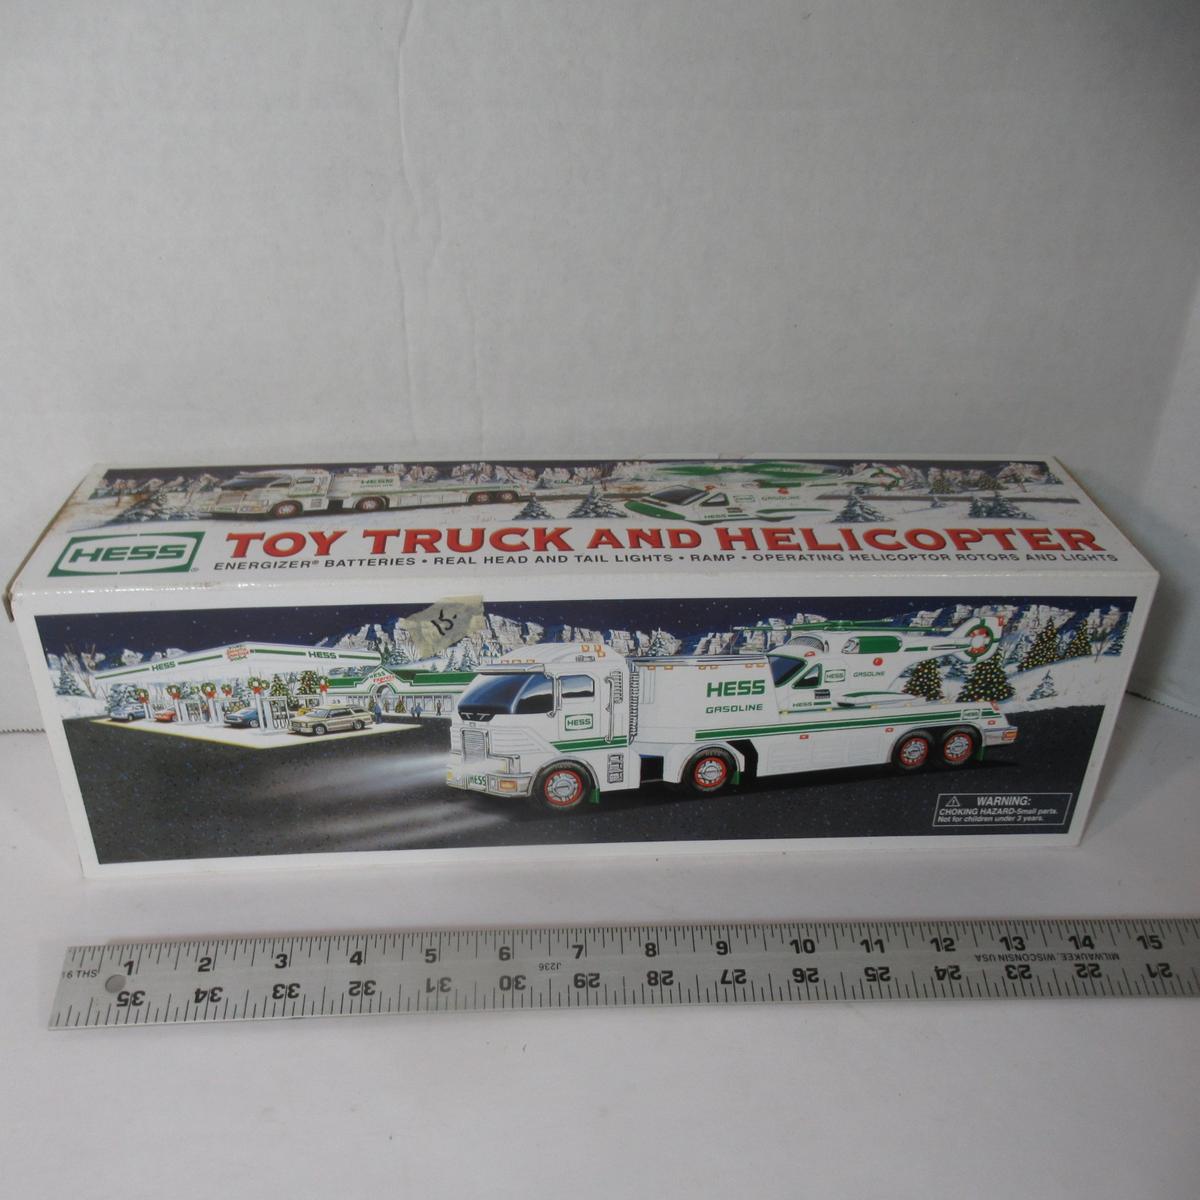 Hess Toy Truck & Helicopter Moving Parts & Working Lights - In Box